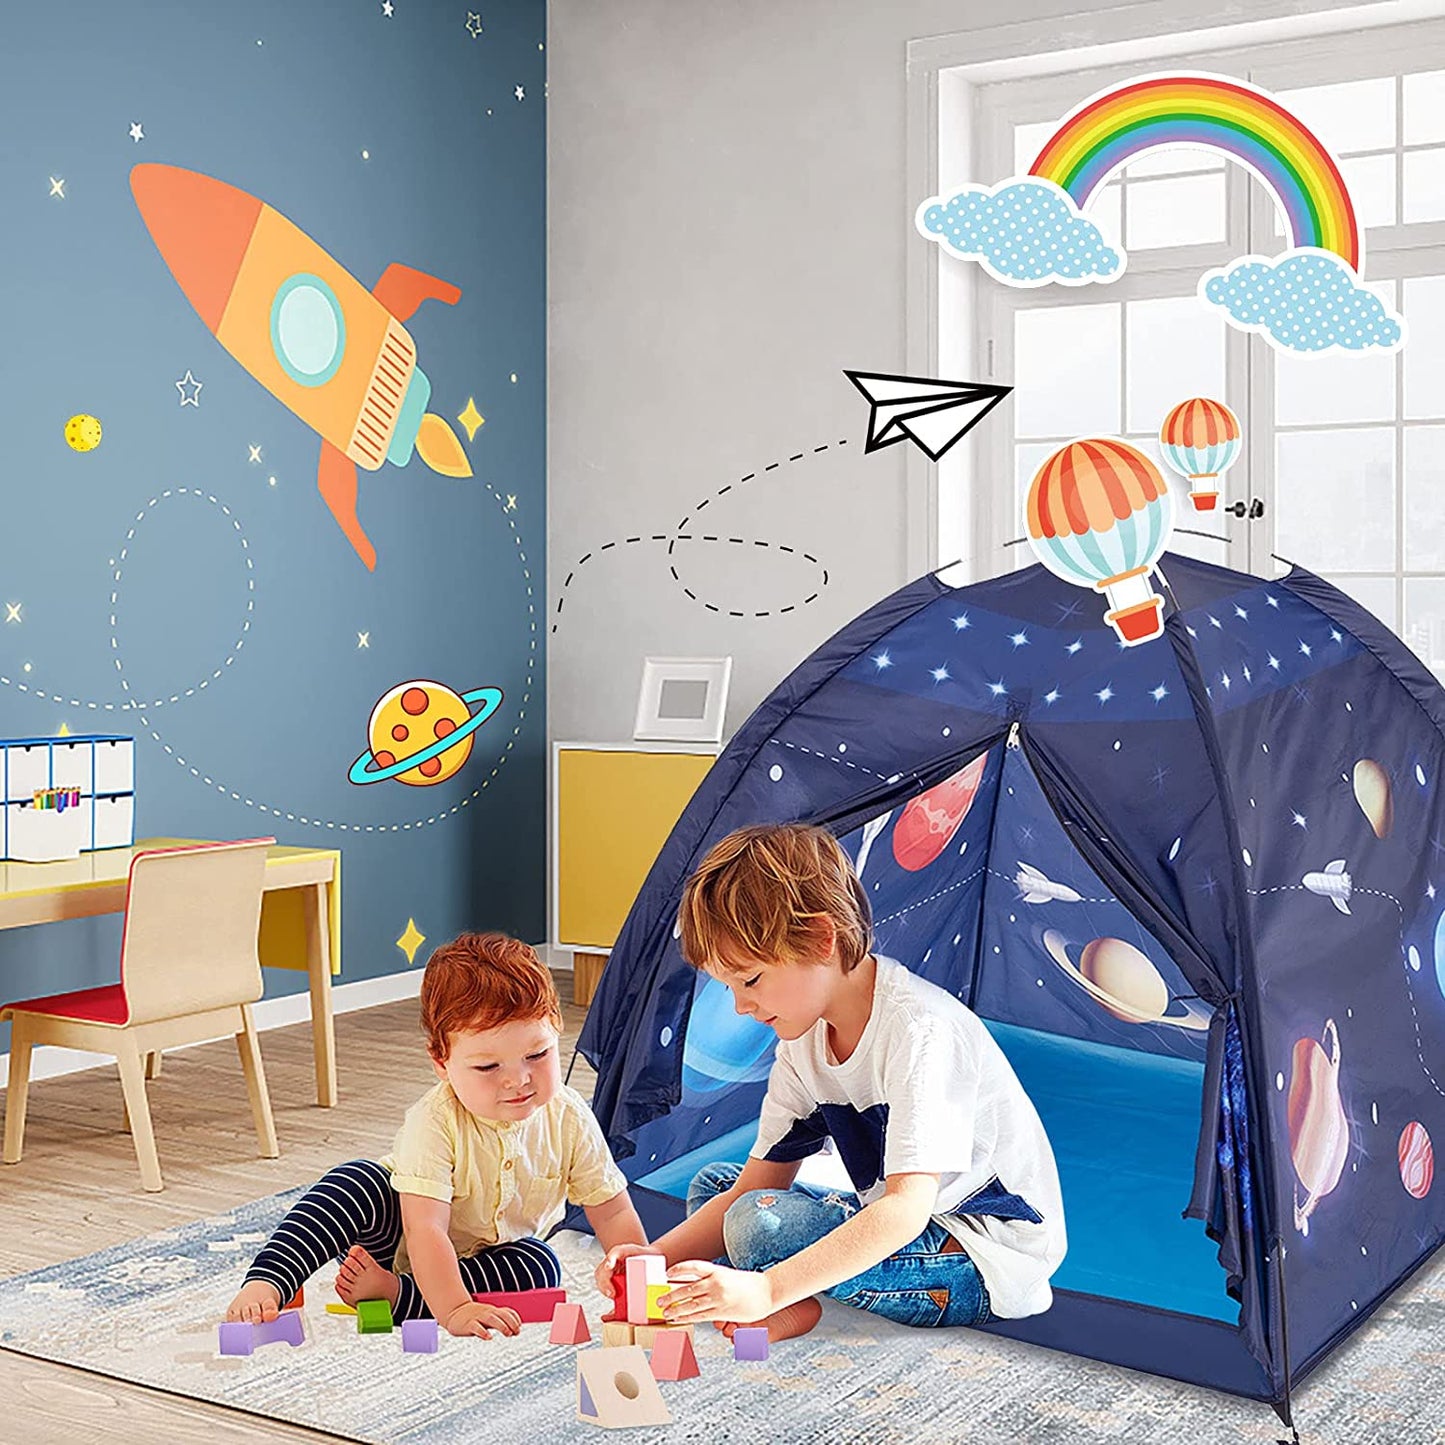 Gentle Space World Universe Indoor Playhouse Play Tent for kids